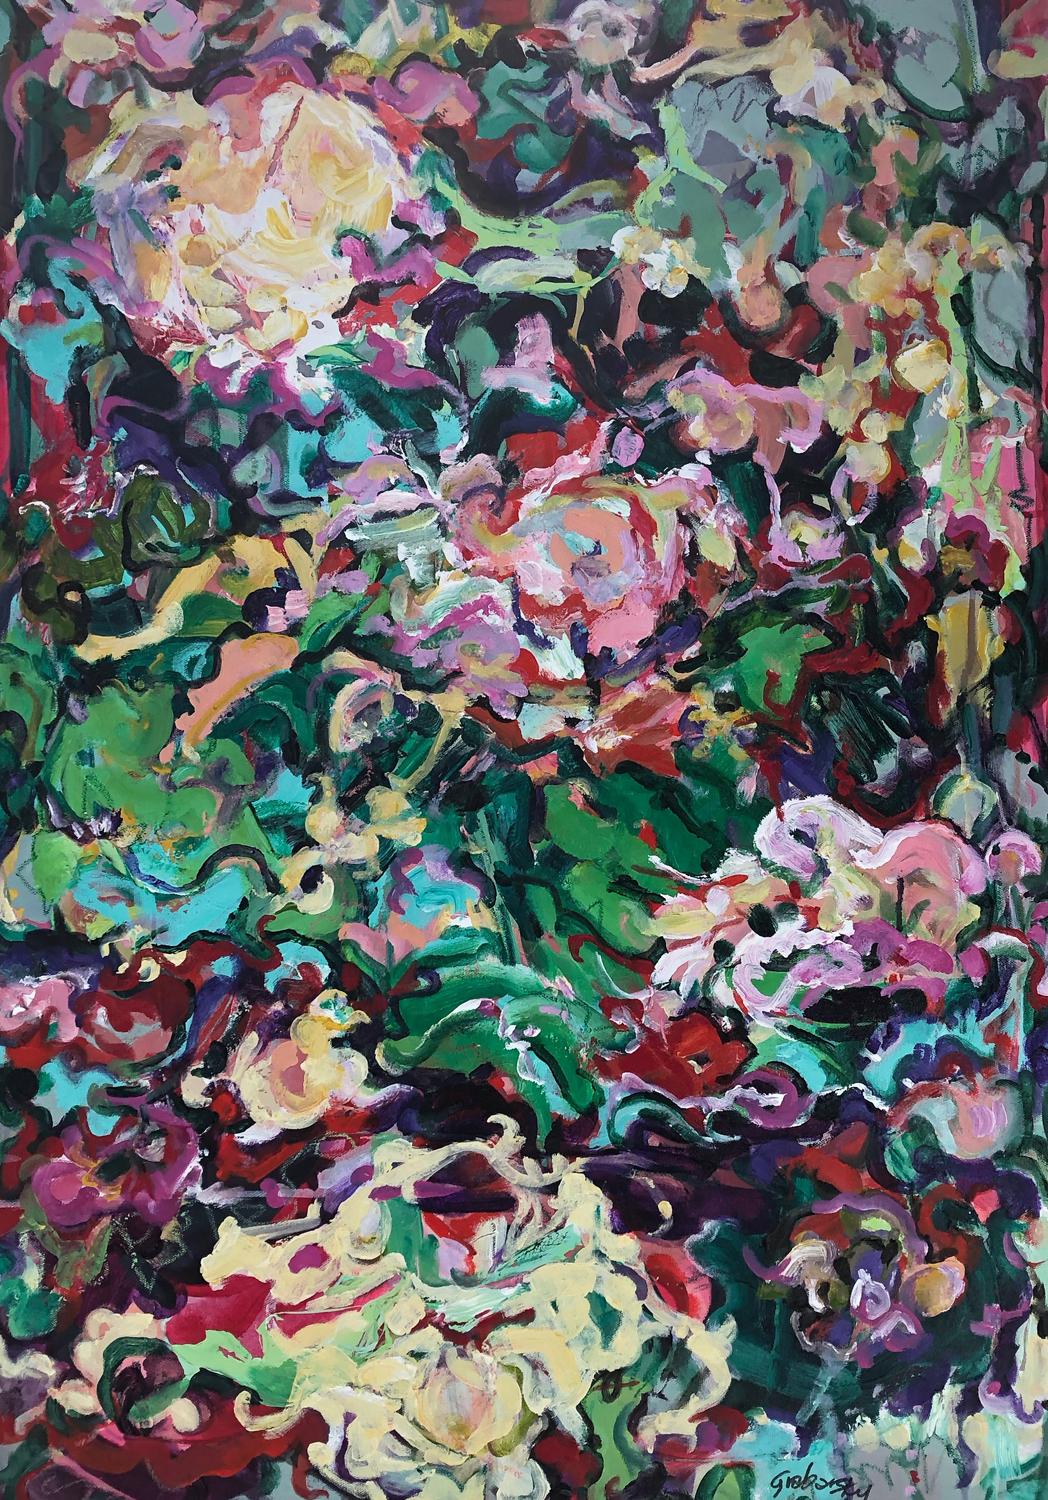 <p>Artist Comments<br />Part of Sheila's Fantasy Garden series of 20 paintings. Swirling pink, red, yellow, violet, blue and green intimate a vibrant summer scene. Action-oriented brushwork moves the eye throughout the composition. Sheila says